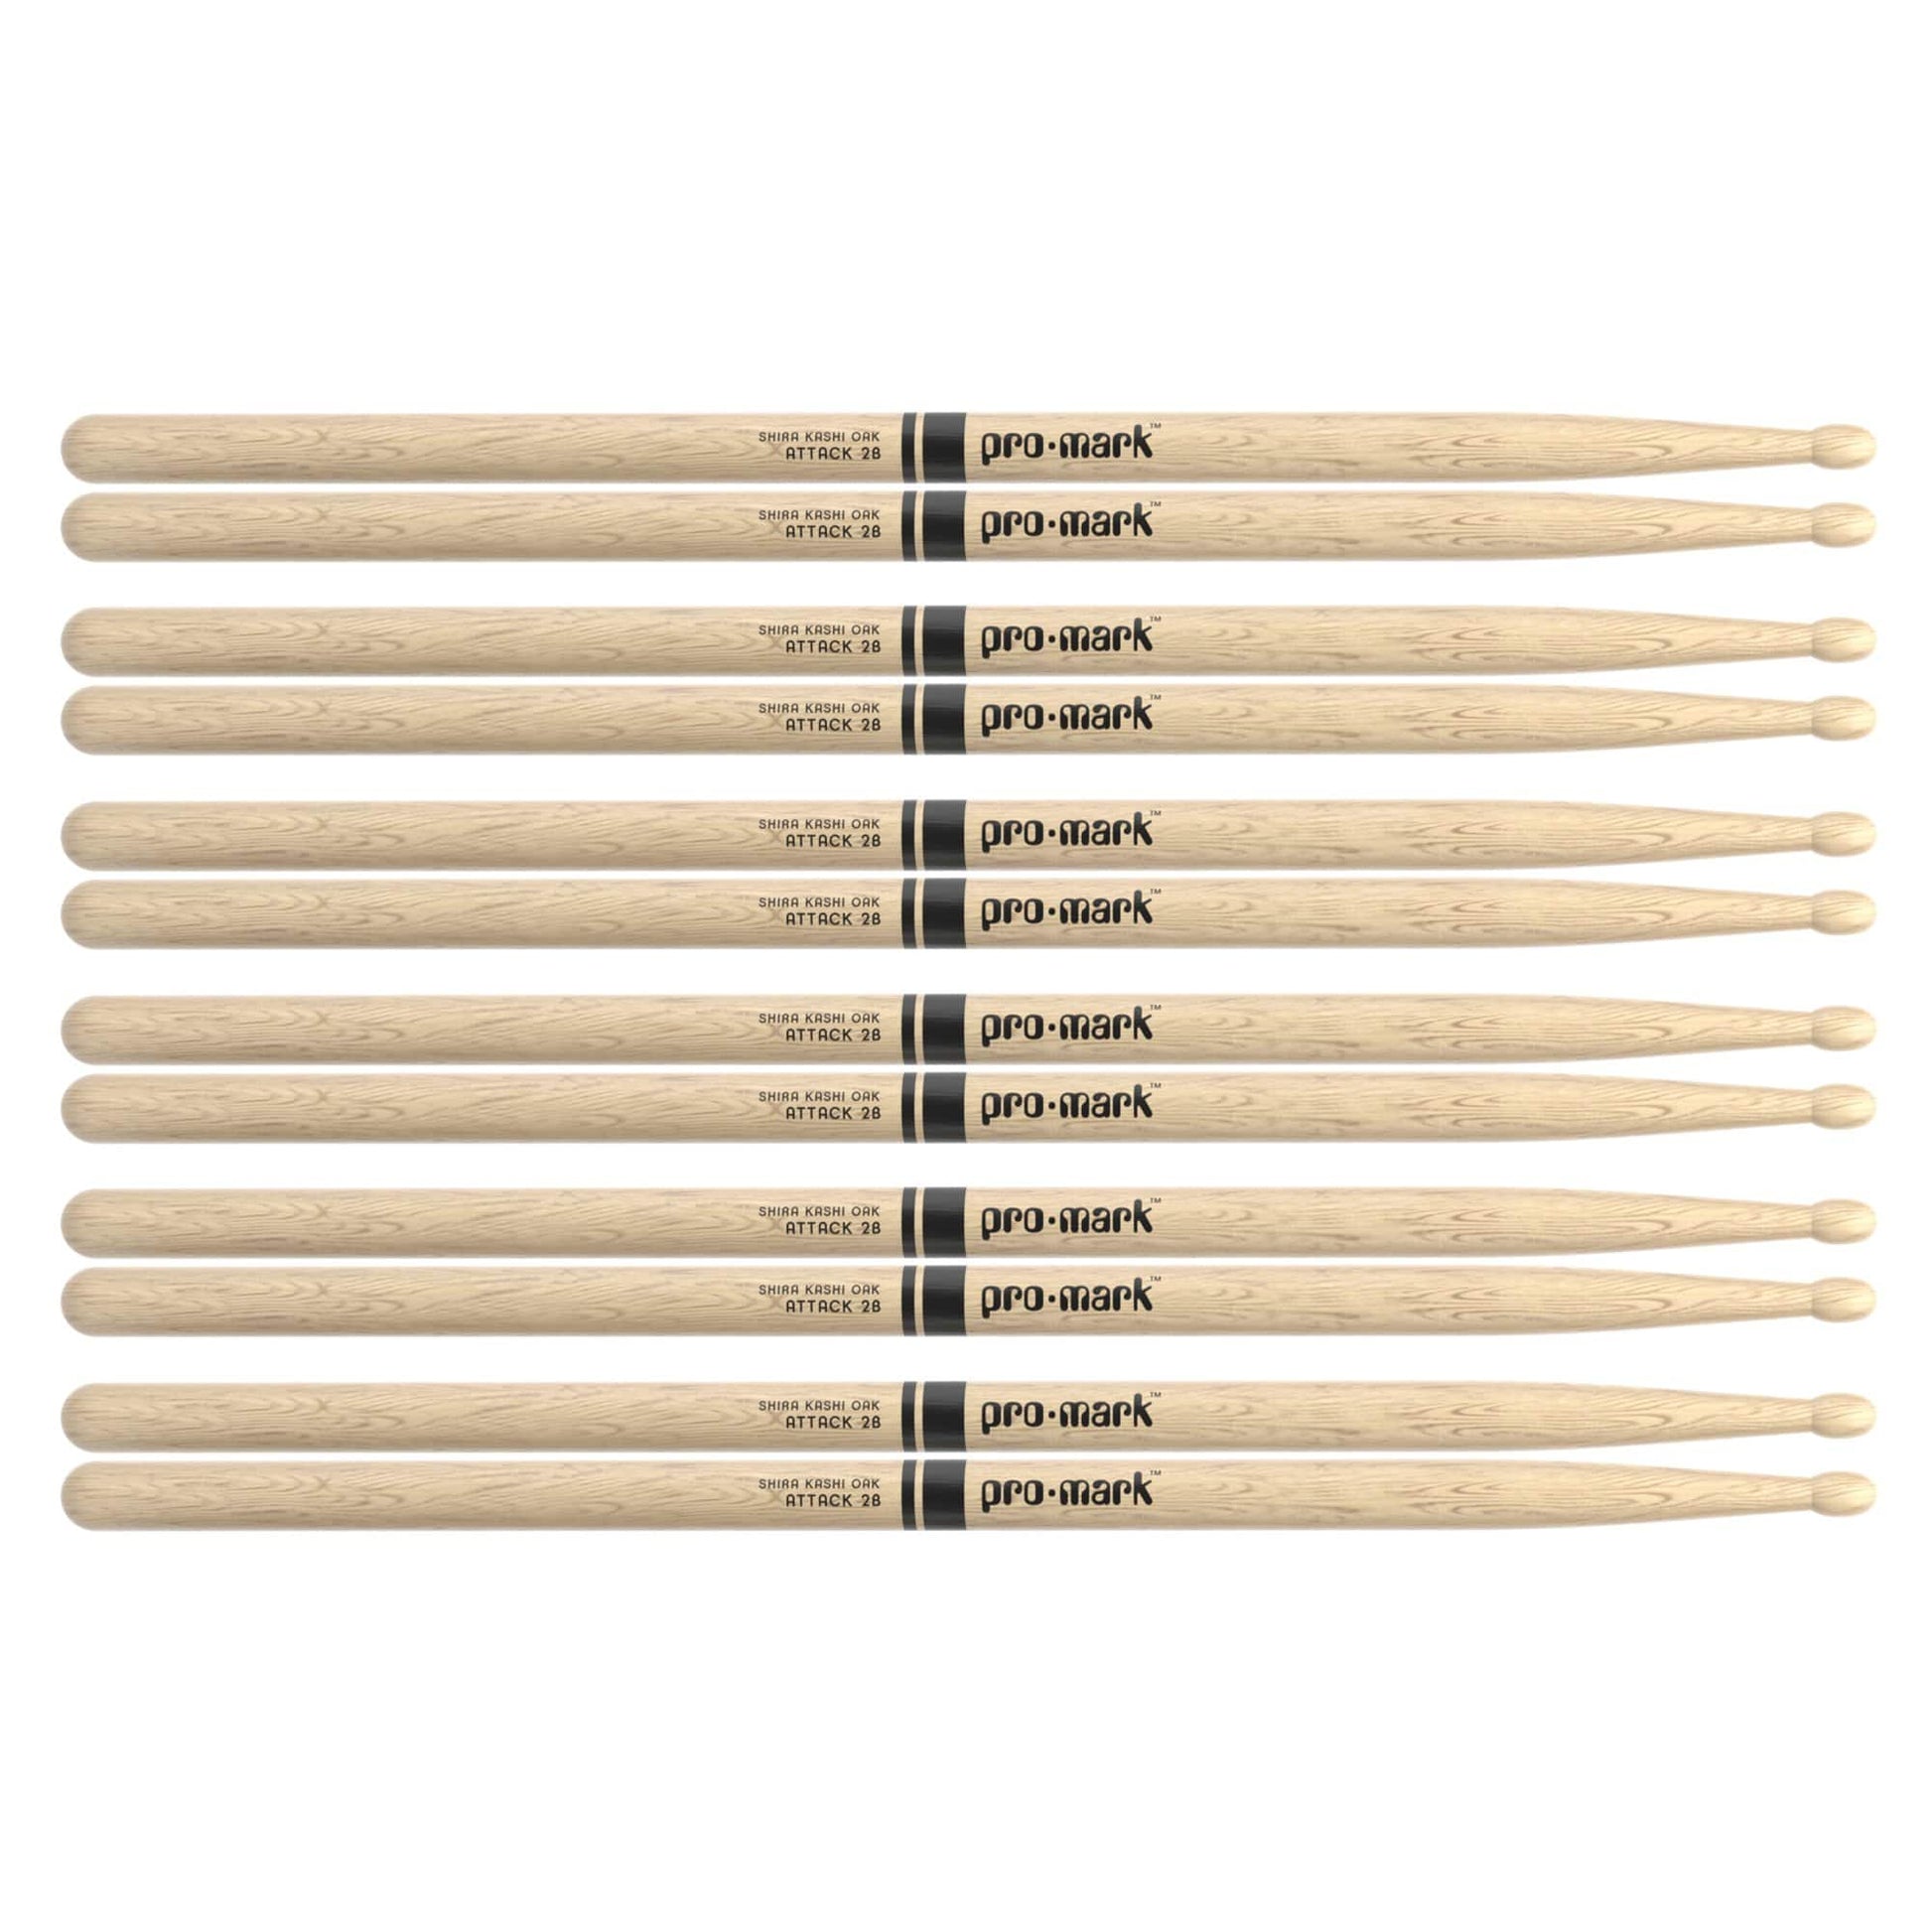 Promark Japanese White Oak 2B Wood Tip Drum Sticks (6 Pair Bundle) Drums and Percussion / Parts and Accessories / Drum Sticks and Mallets